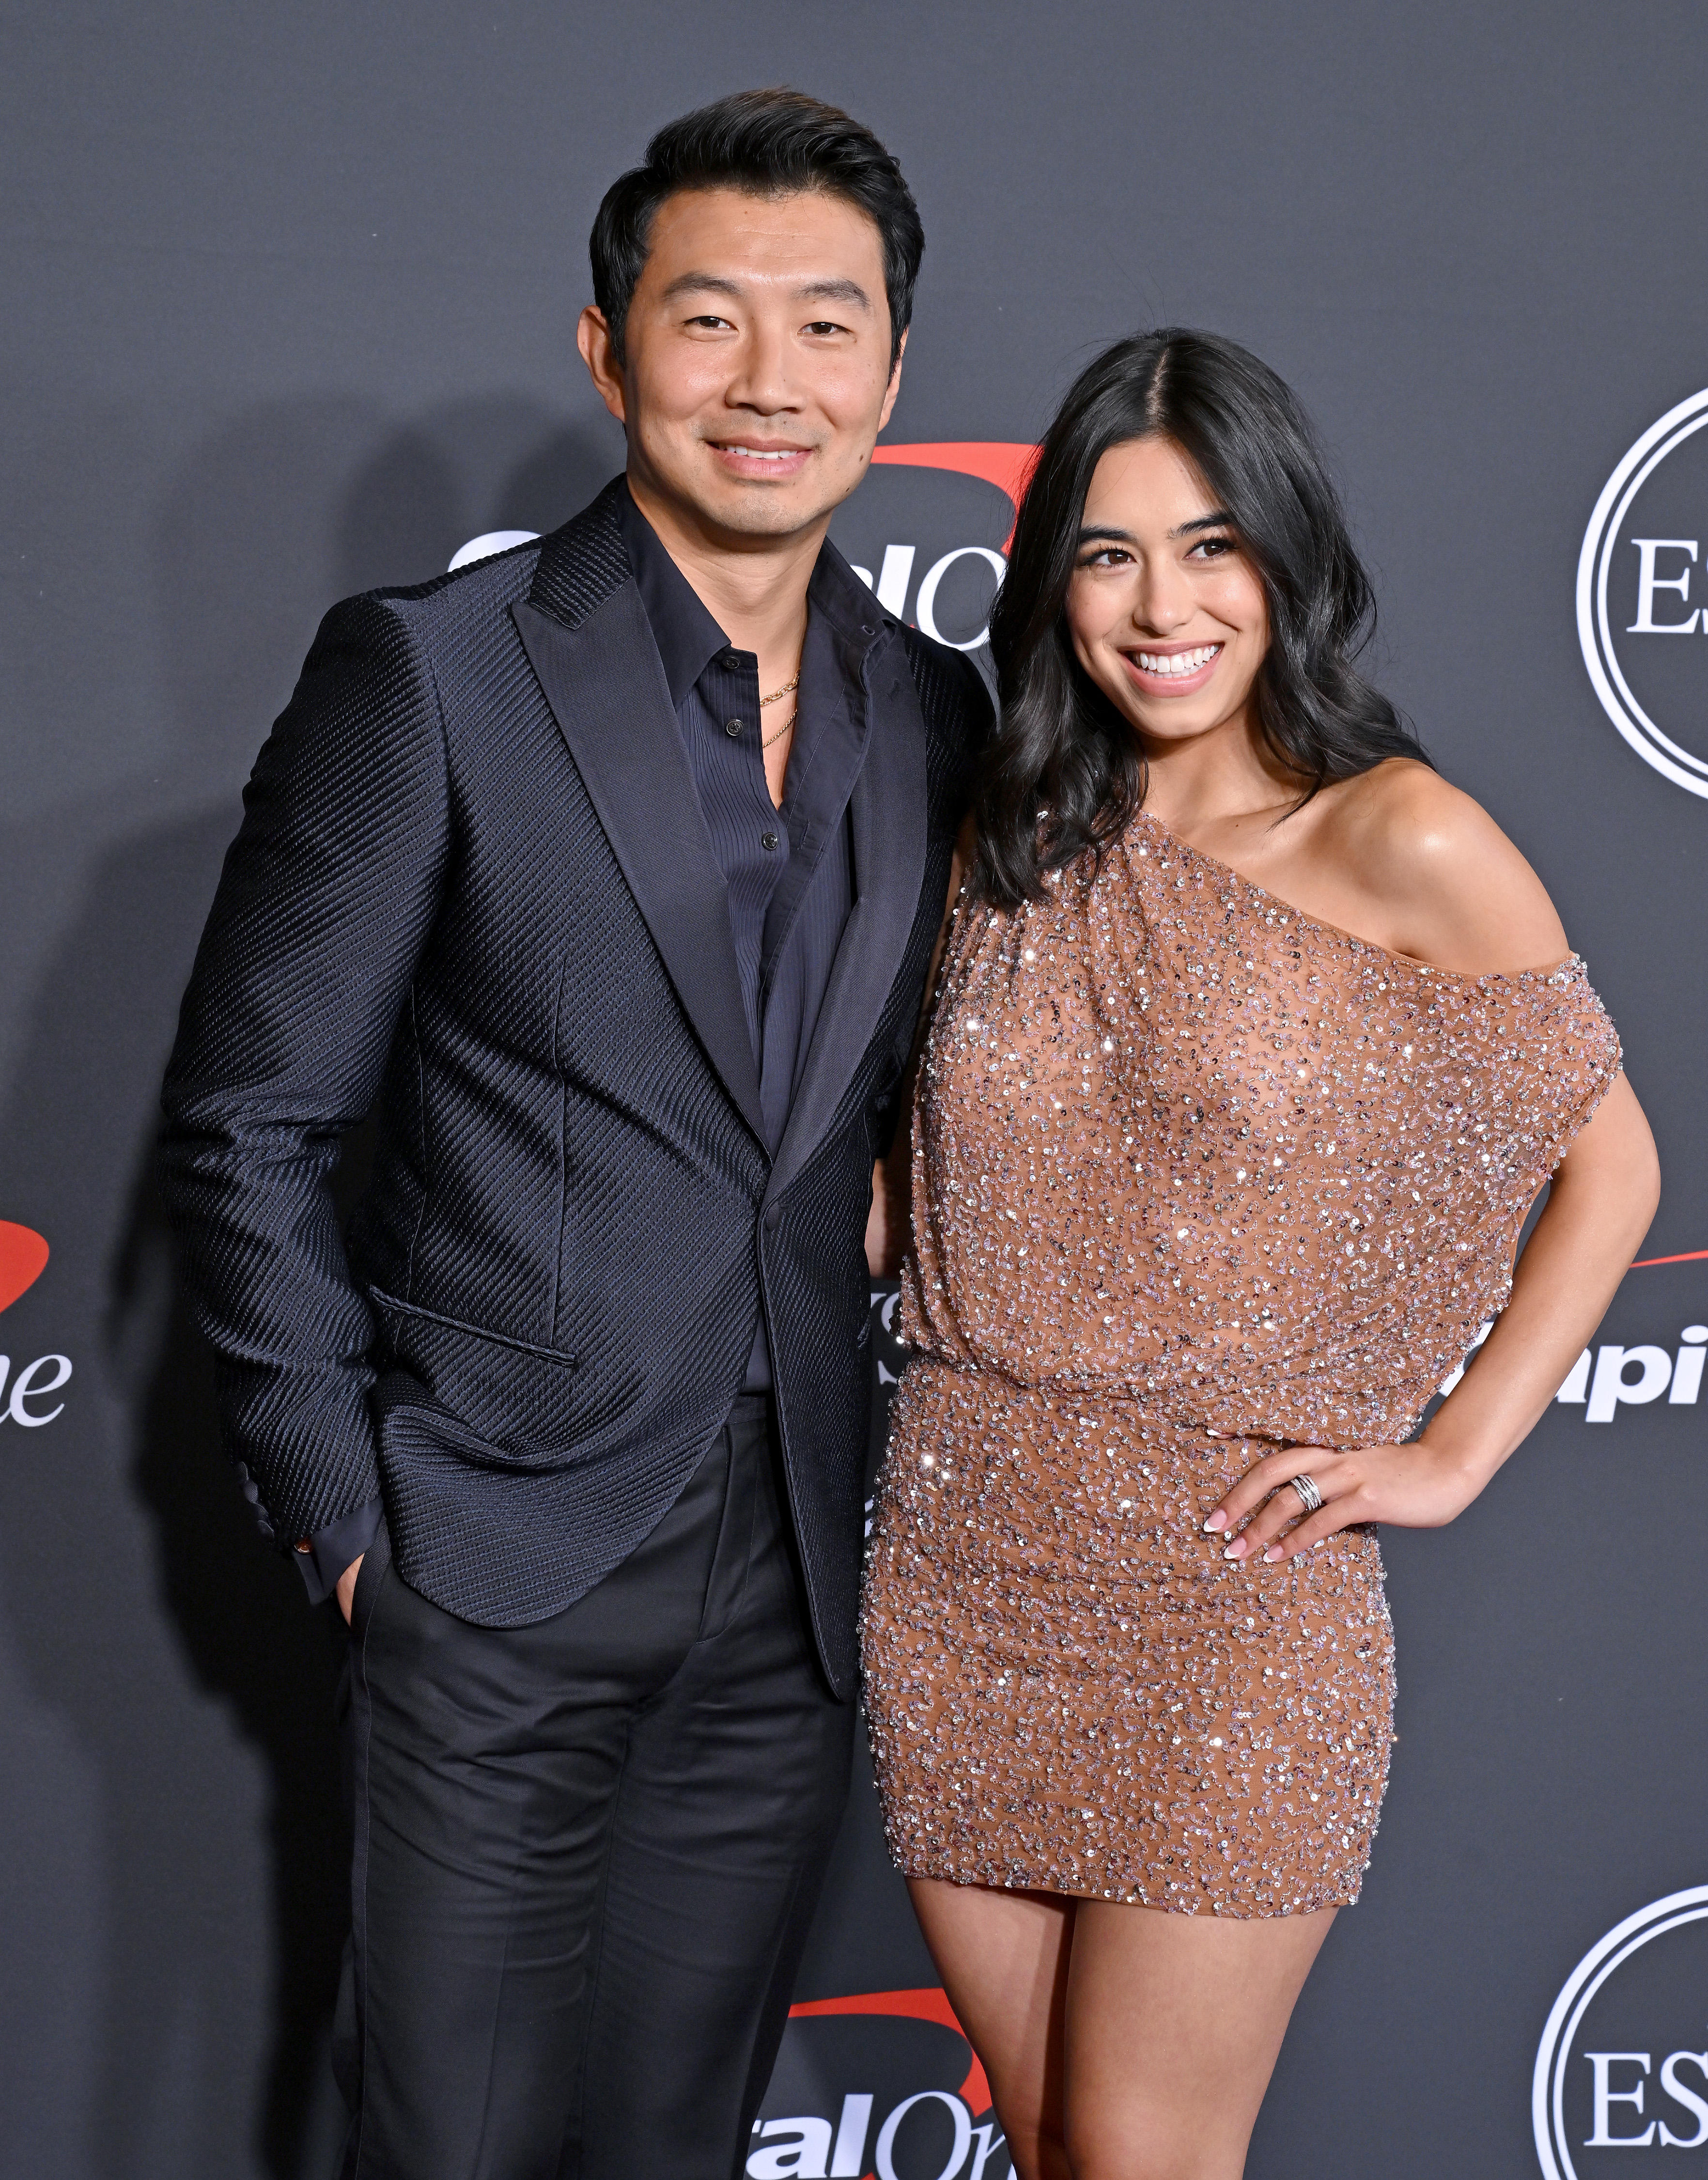 Simu Liu and Jade Bender at the 2022 ESPYs on July 20, 2022, in Hollywood, California. | Source: Getty Images